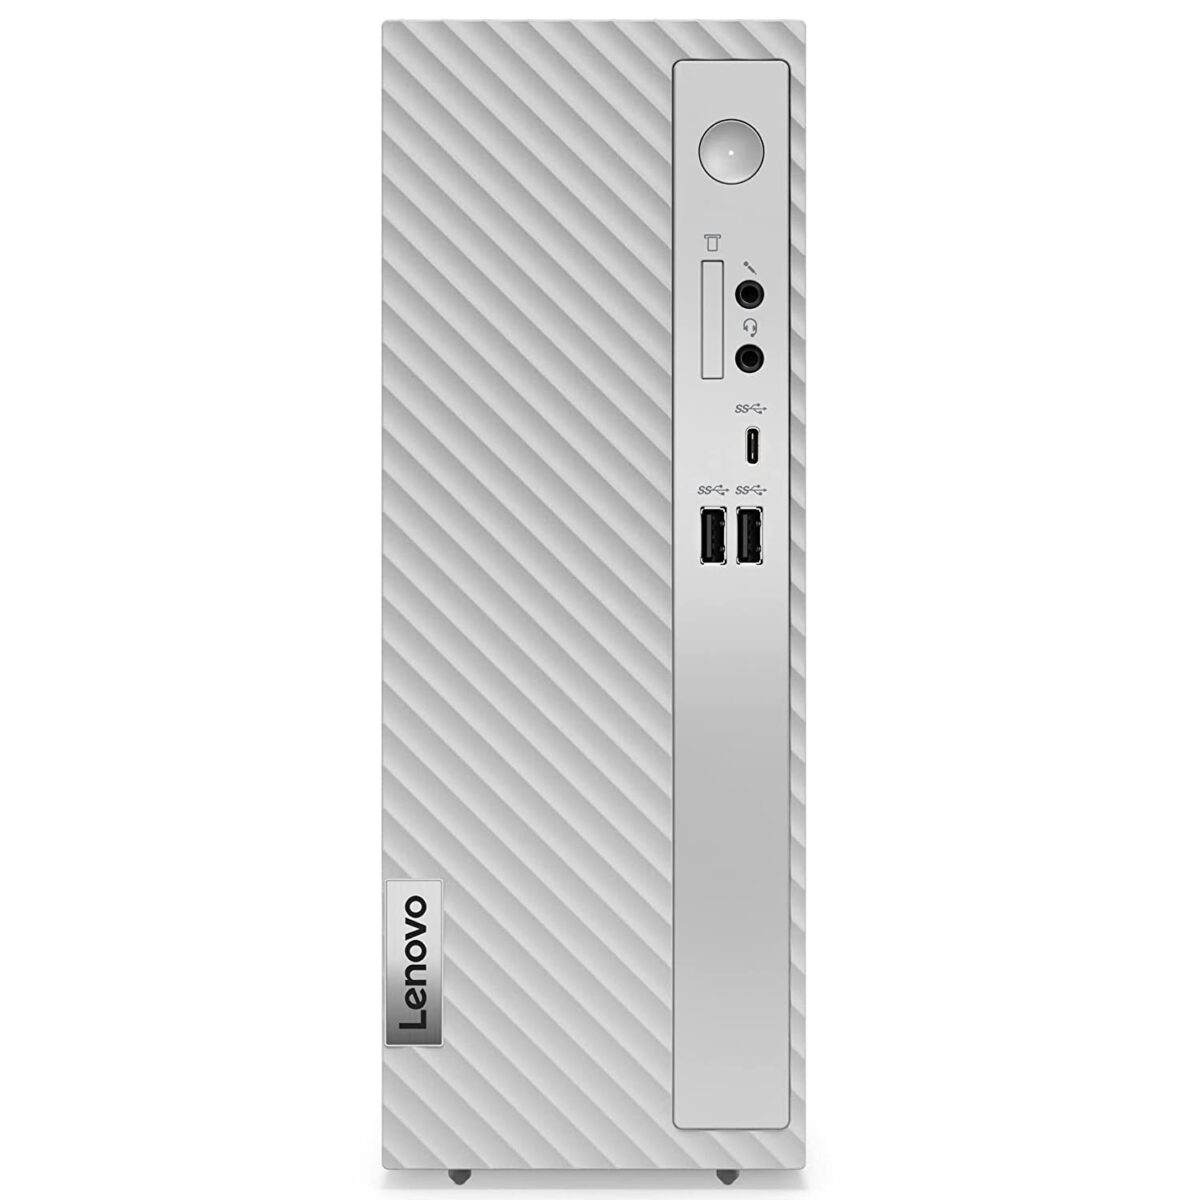 Lenovo IdeaCentre 3 90SM004FIN with 12th Gen Intel Core i3 12100 launched in India